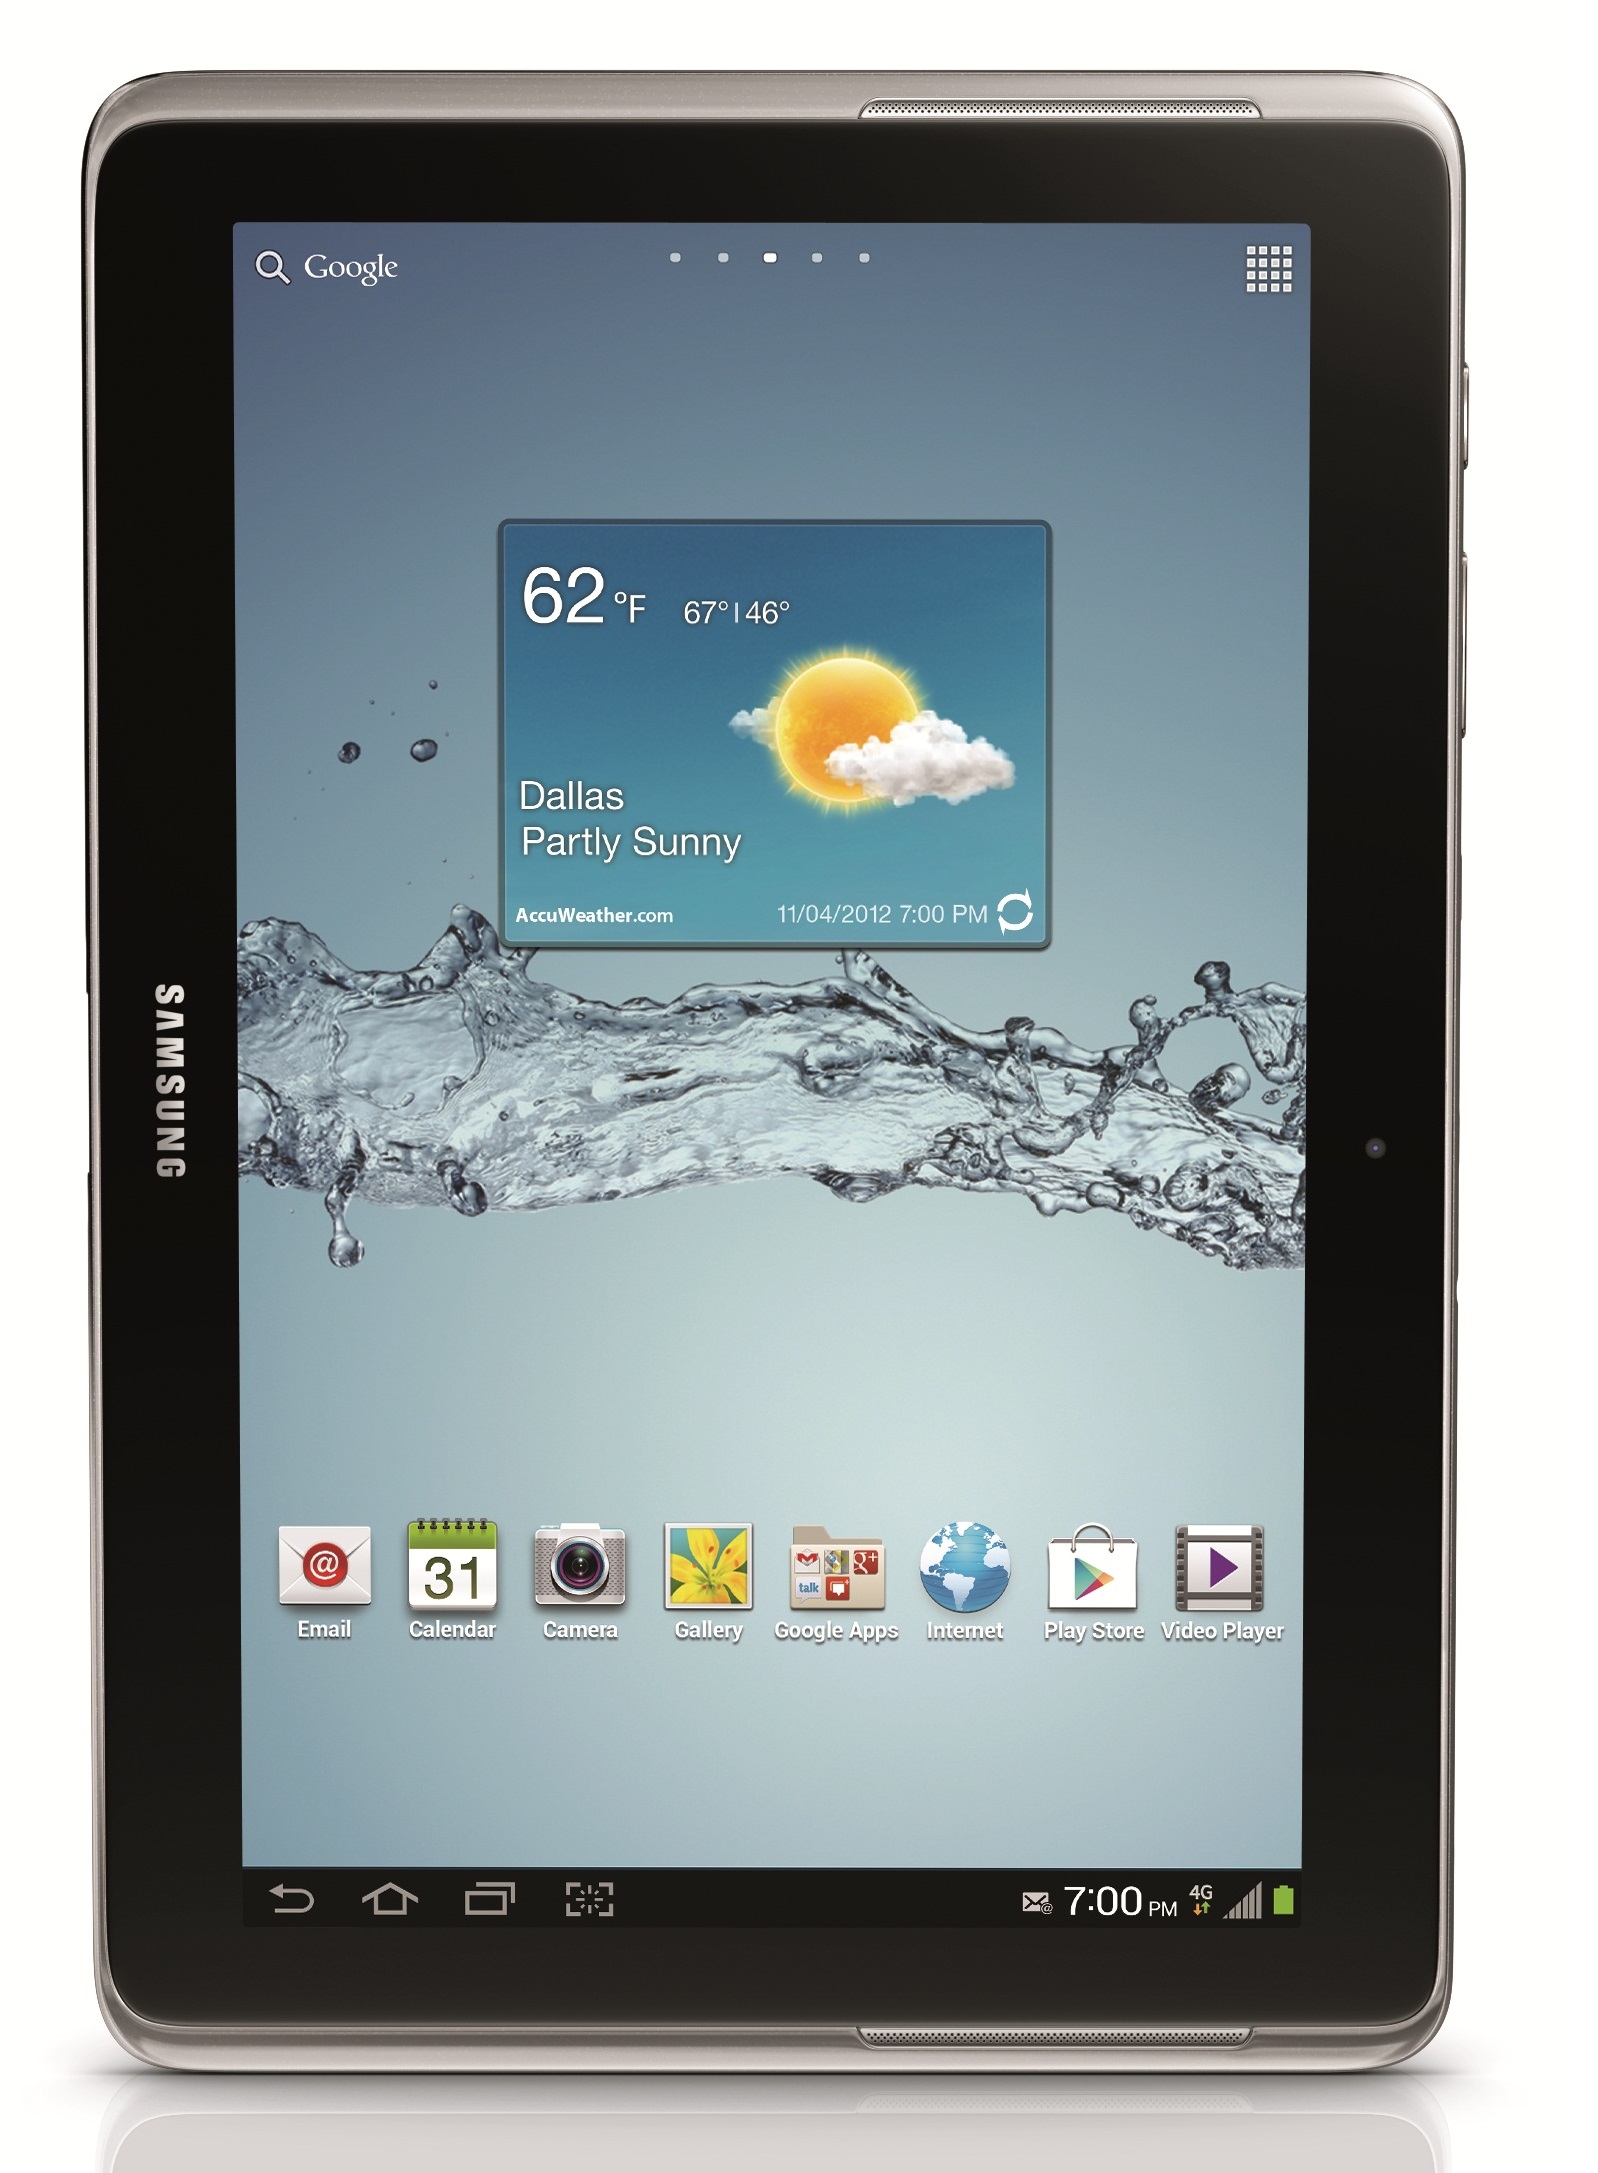 Samsung GALAXY Tab 2 10.1 Sprint Full Specifications And Price Details